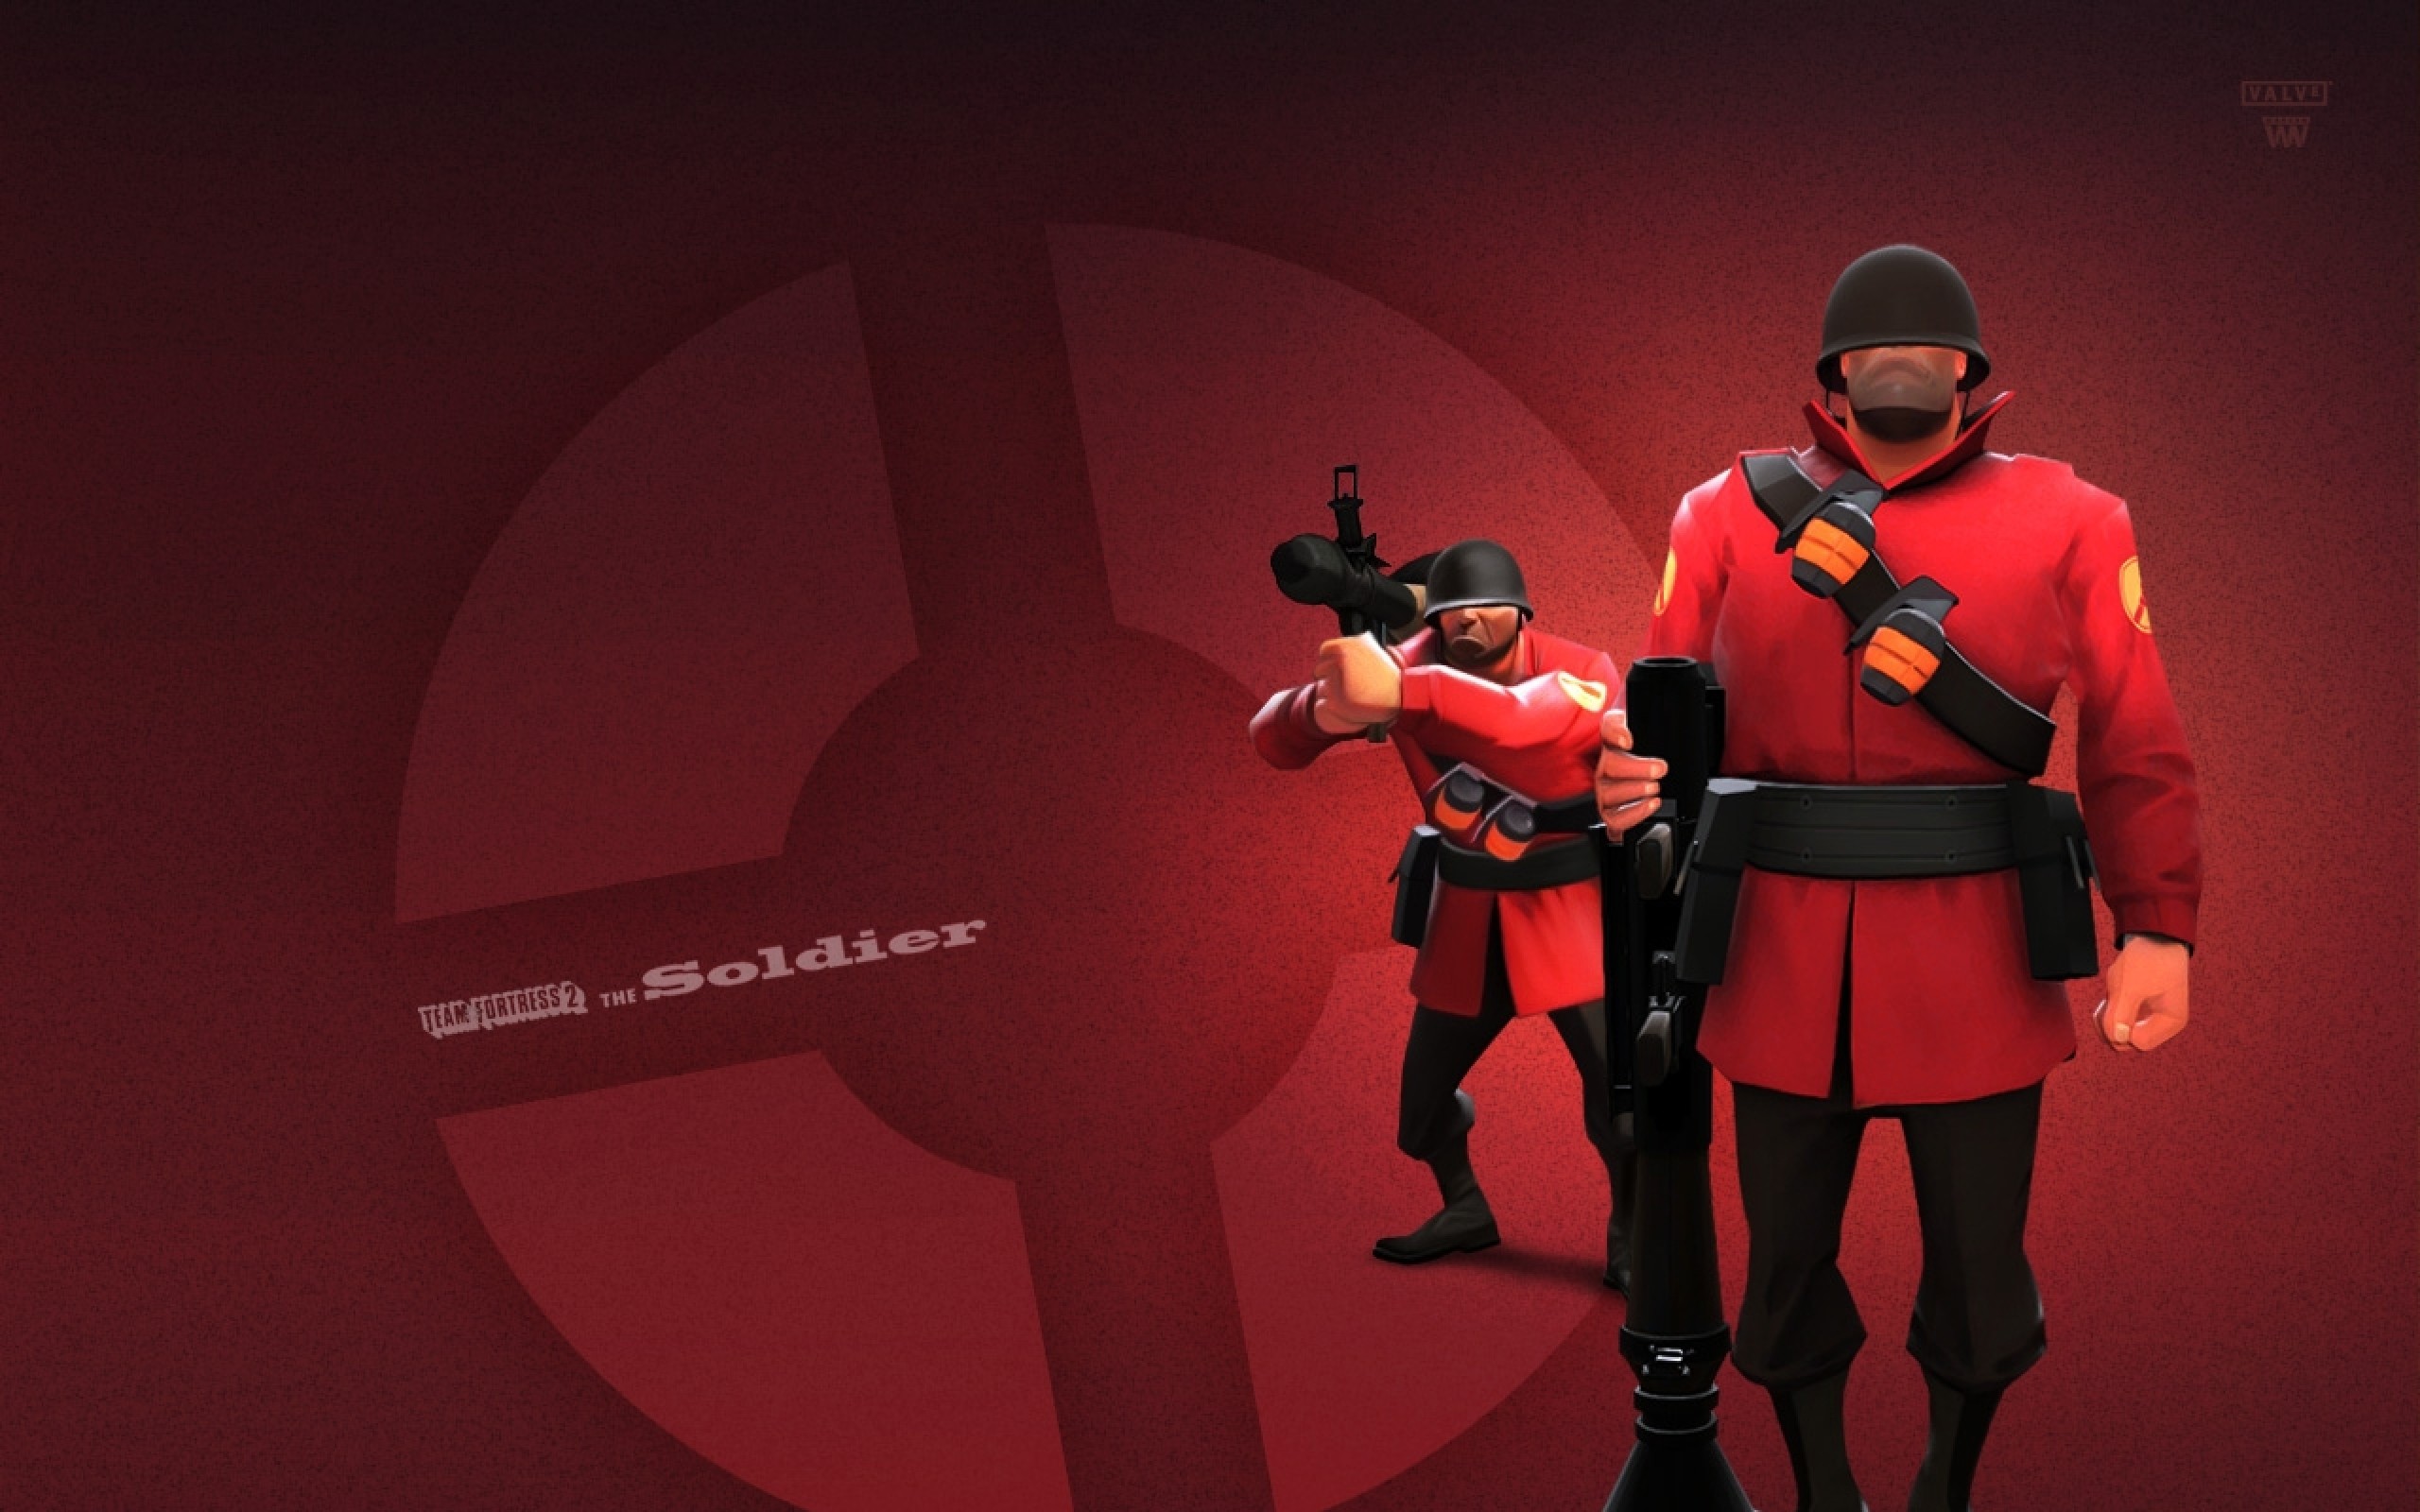 2560x1600 video games team fortress 2 soldier tf2 Wallpaper HD